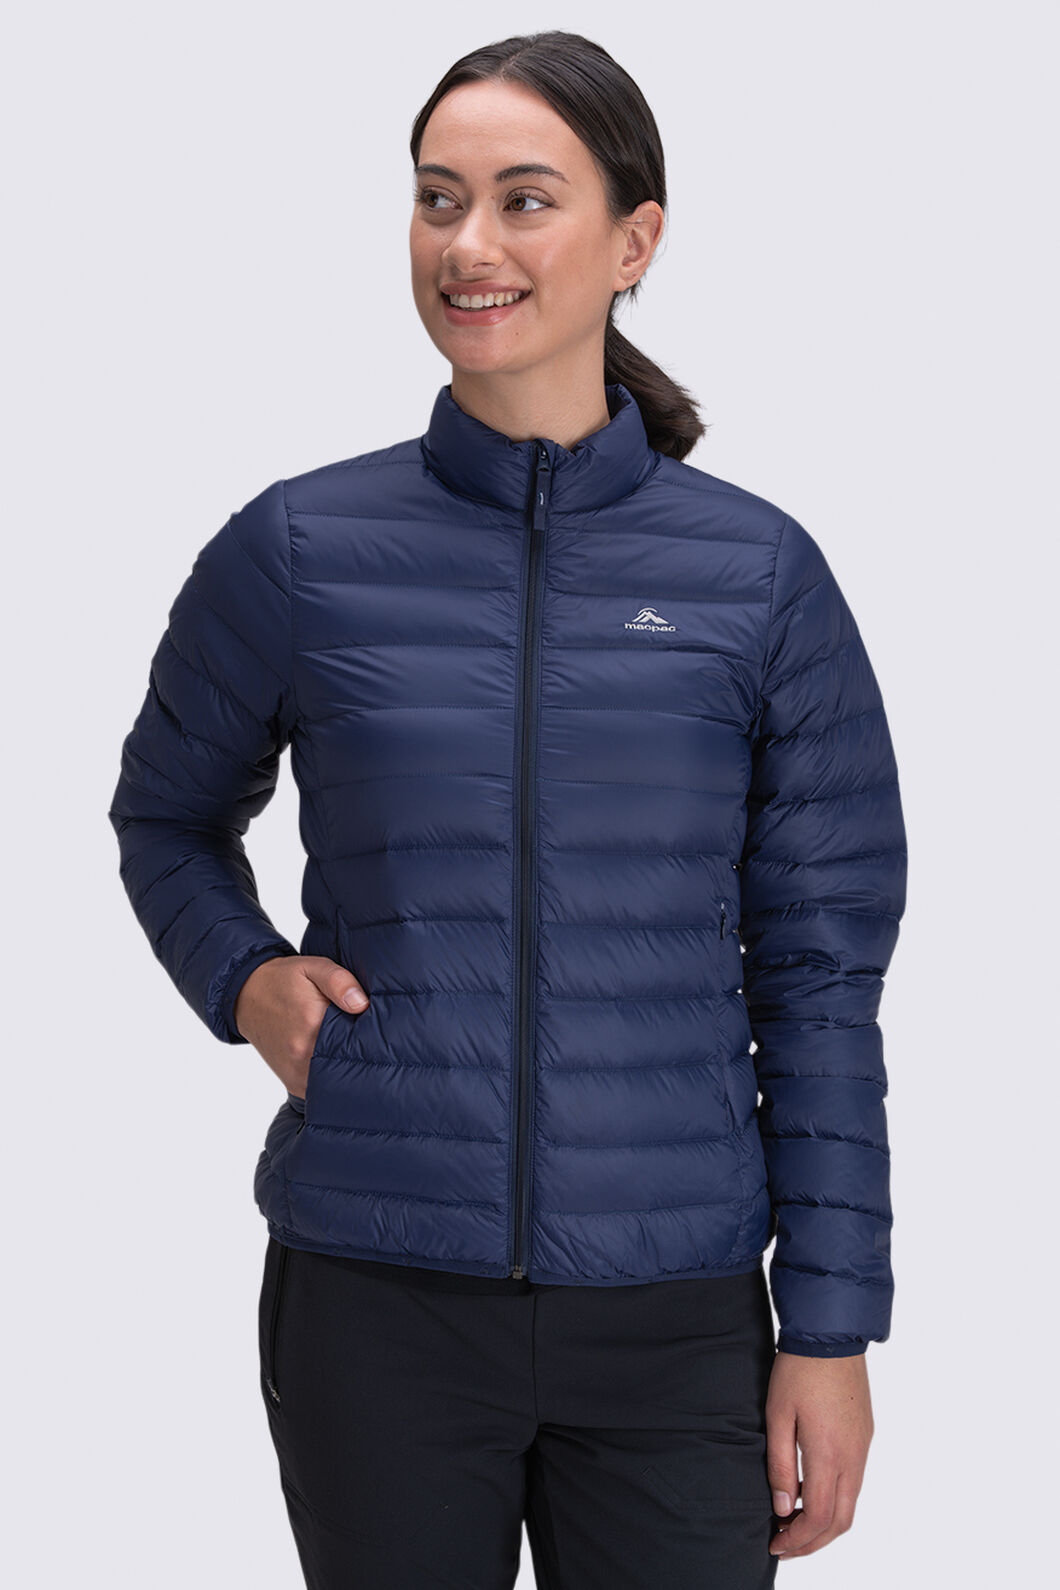 Unlock Wilderness' choice in the Macpac Vs Patagonia comparison, the Uber Light Down Jacket by Macpac